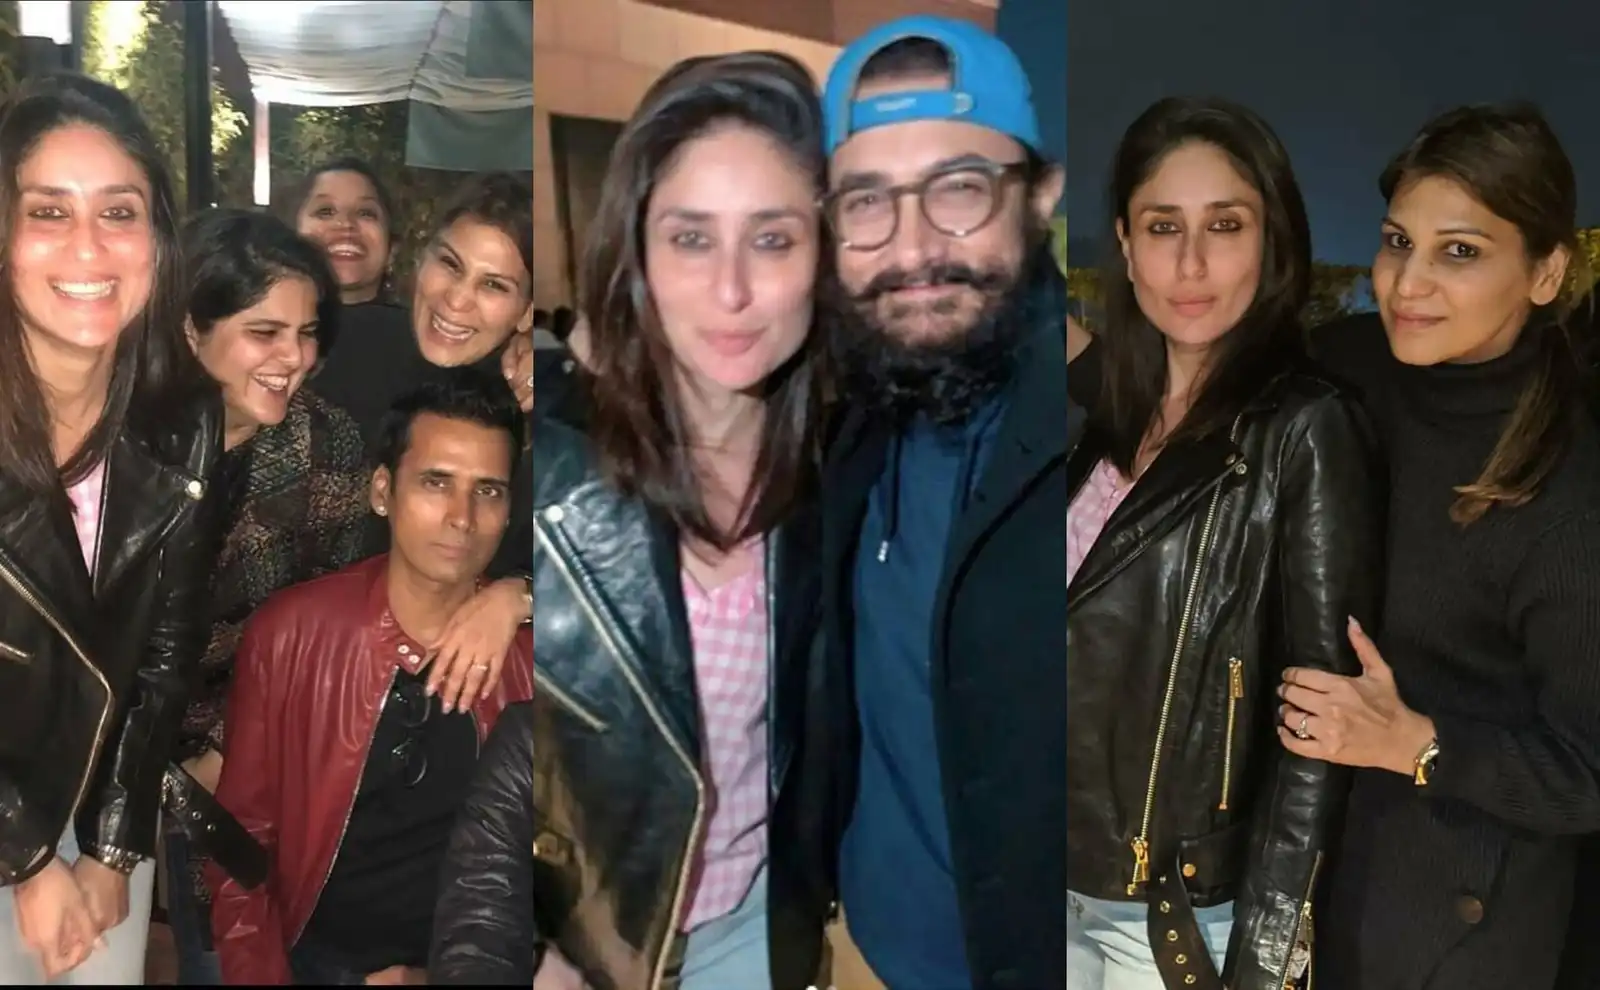 Laal Singh Chaddha: Aamir Khan, Kareena Kapoor And Other Kick Start The Schedule With 'Chill-y' Party